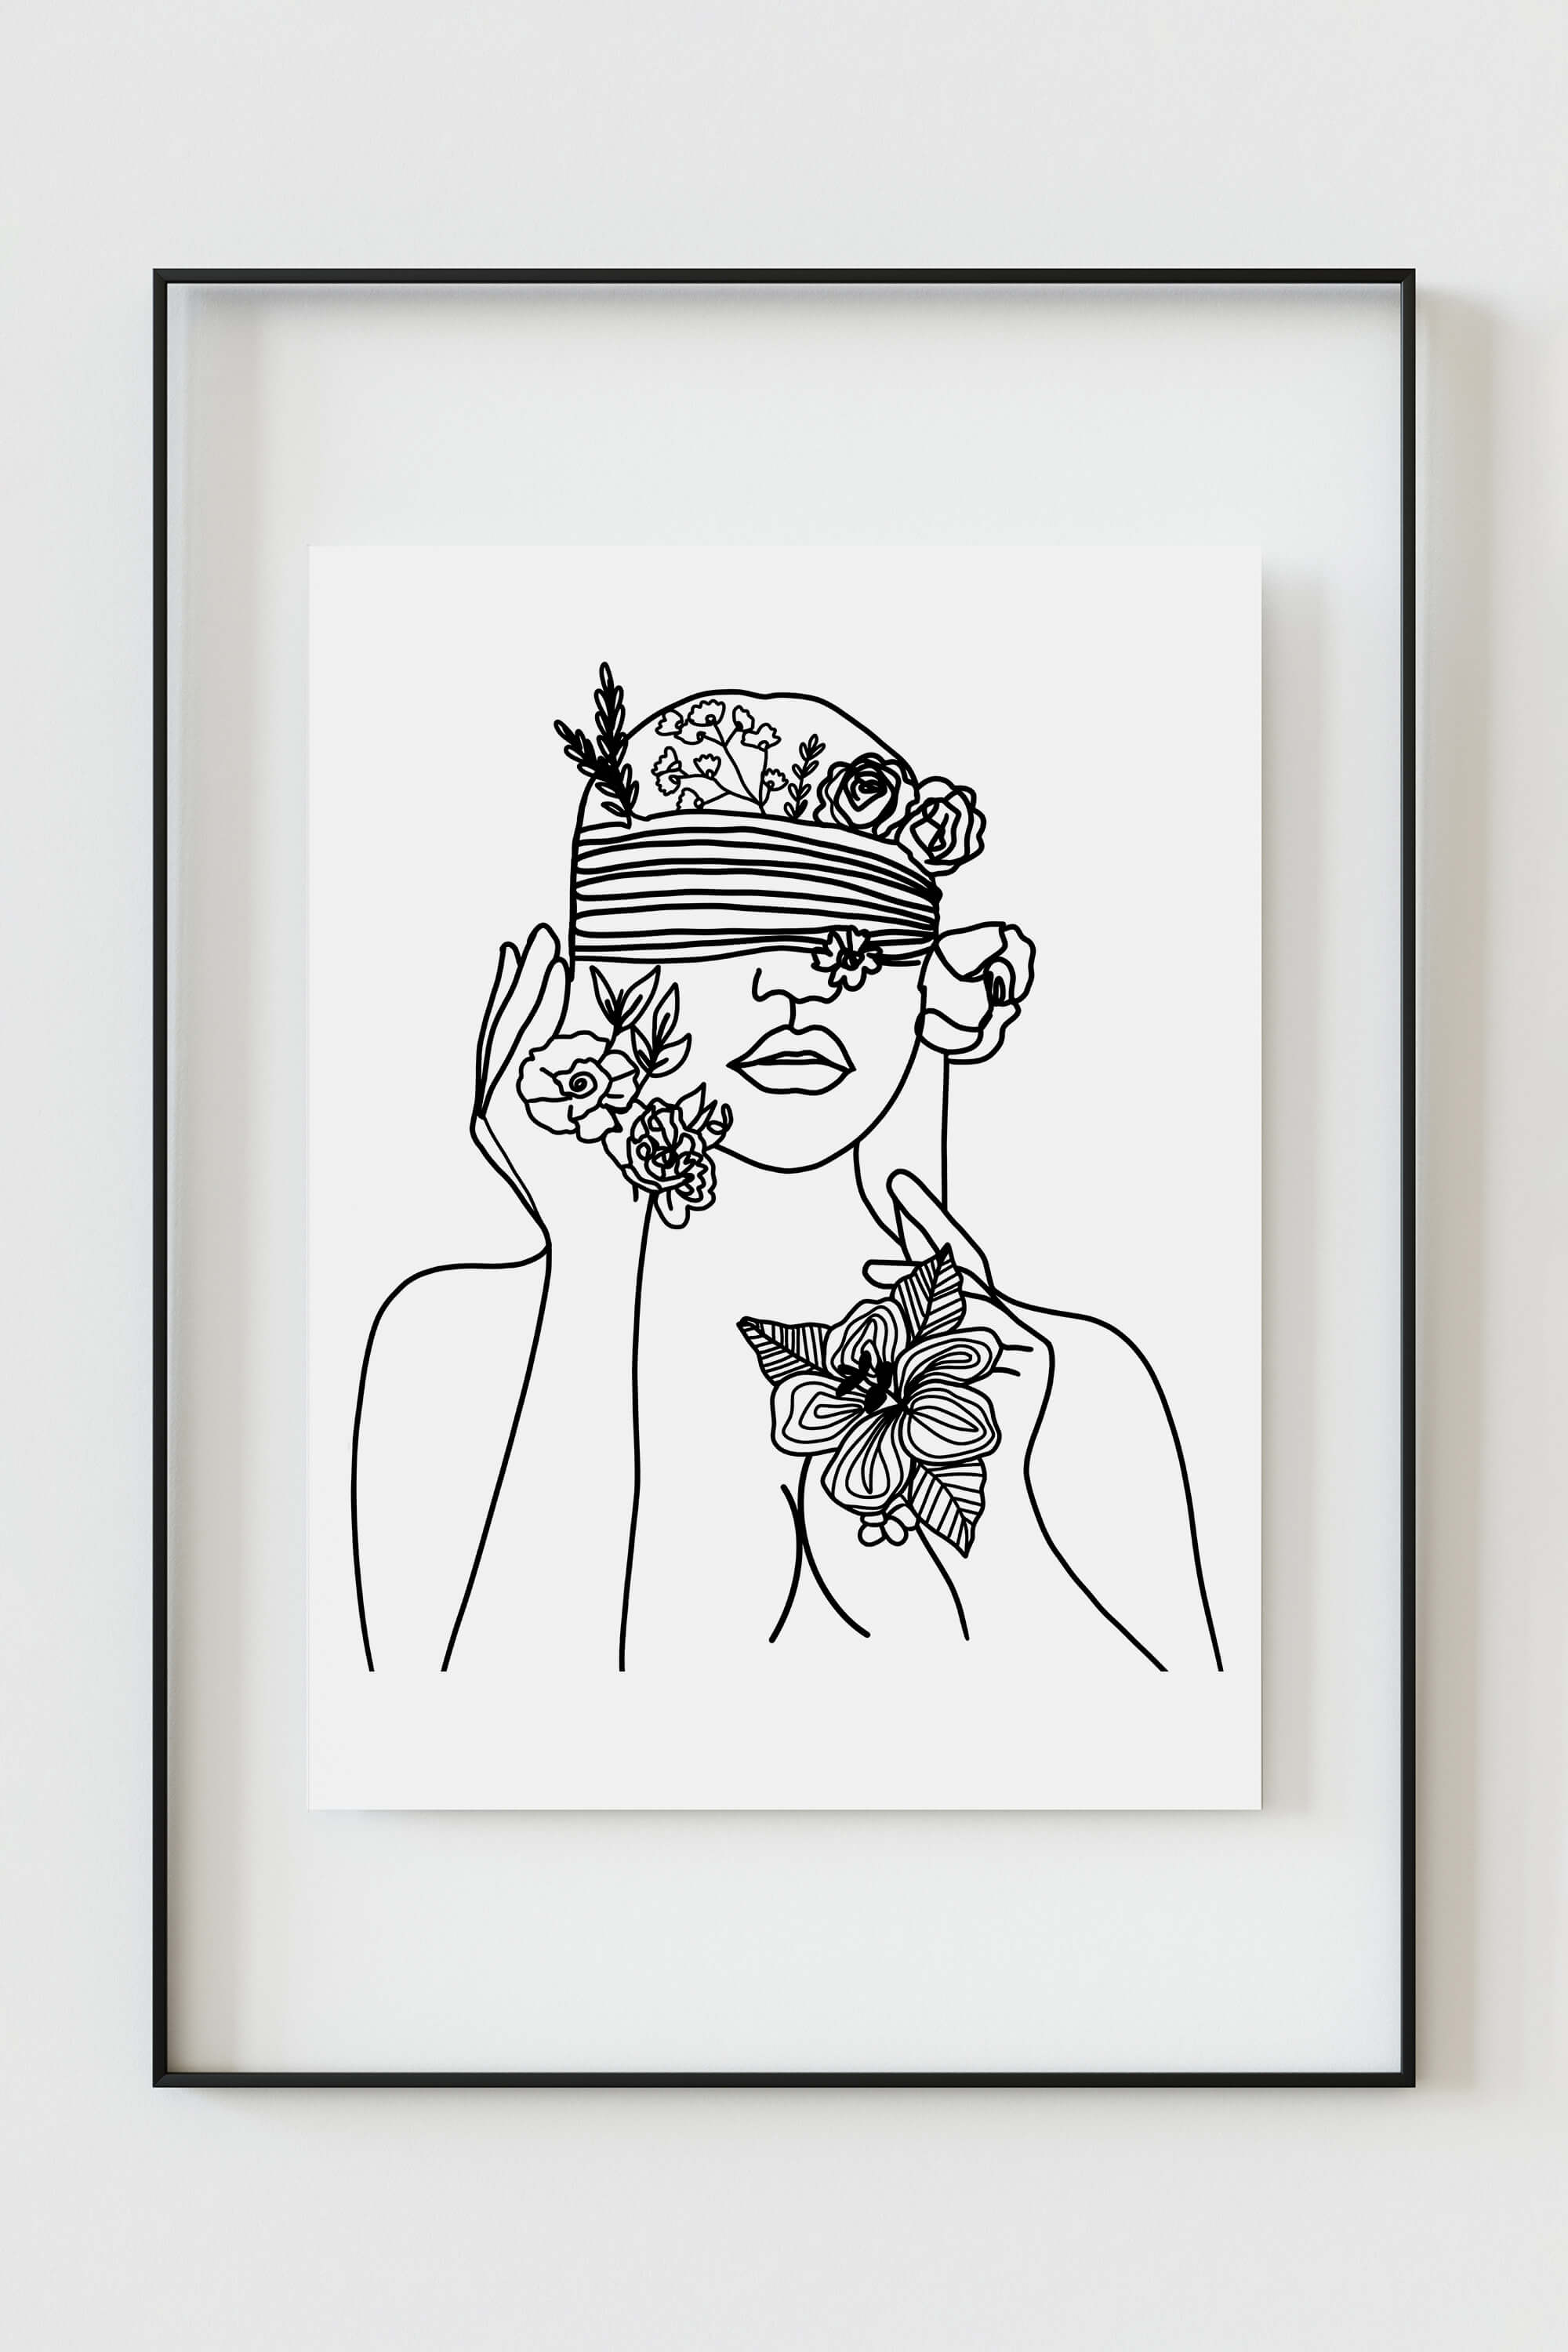 Pretty woman line drawing in trendy boho style. Harmonizing modern aesthetics with bohemian charm. Ideal for those seeking a unique blend of contemporary and eclectic home decor.